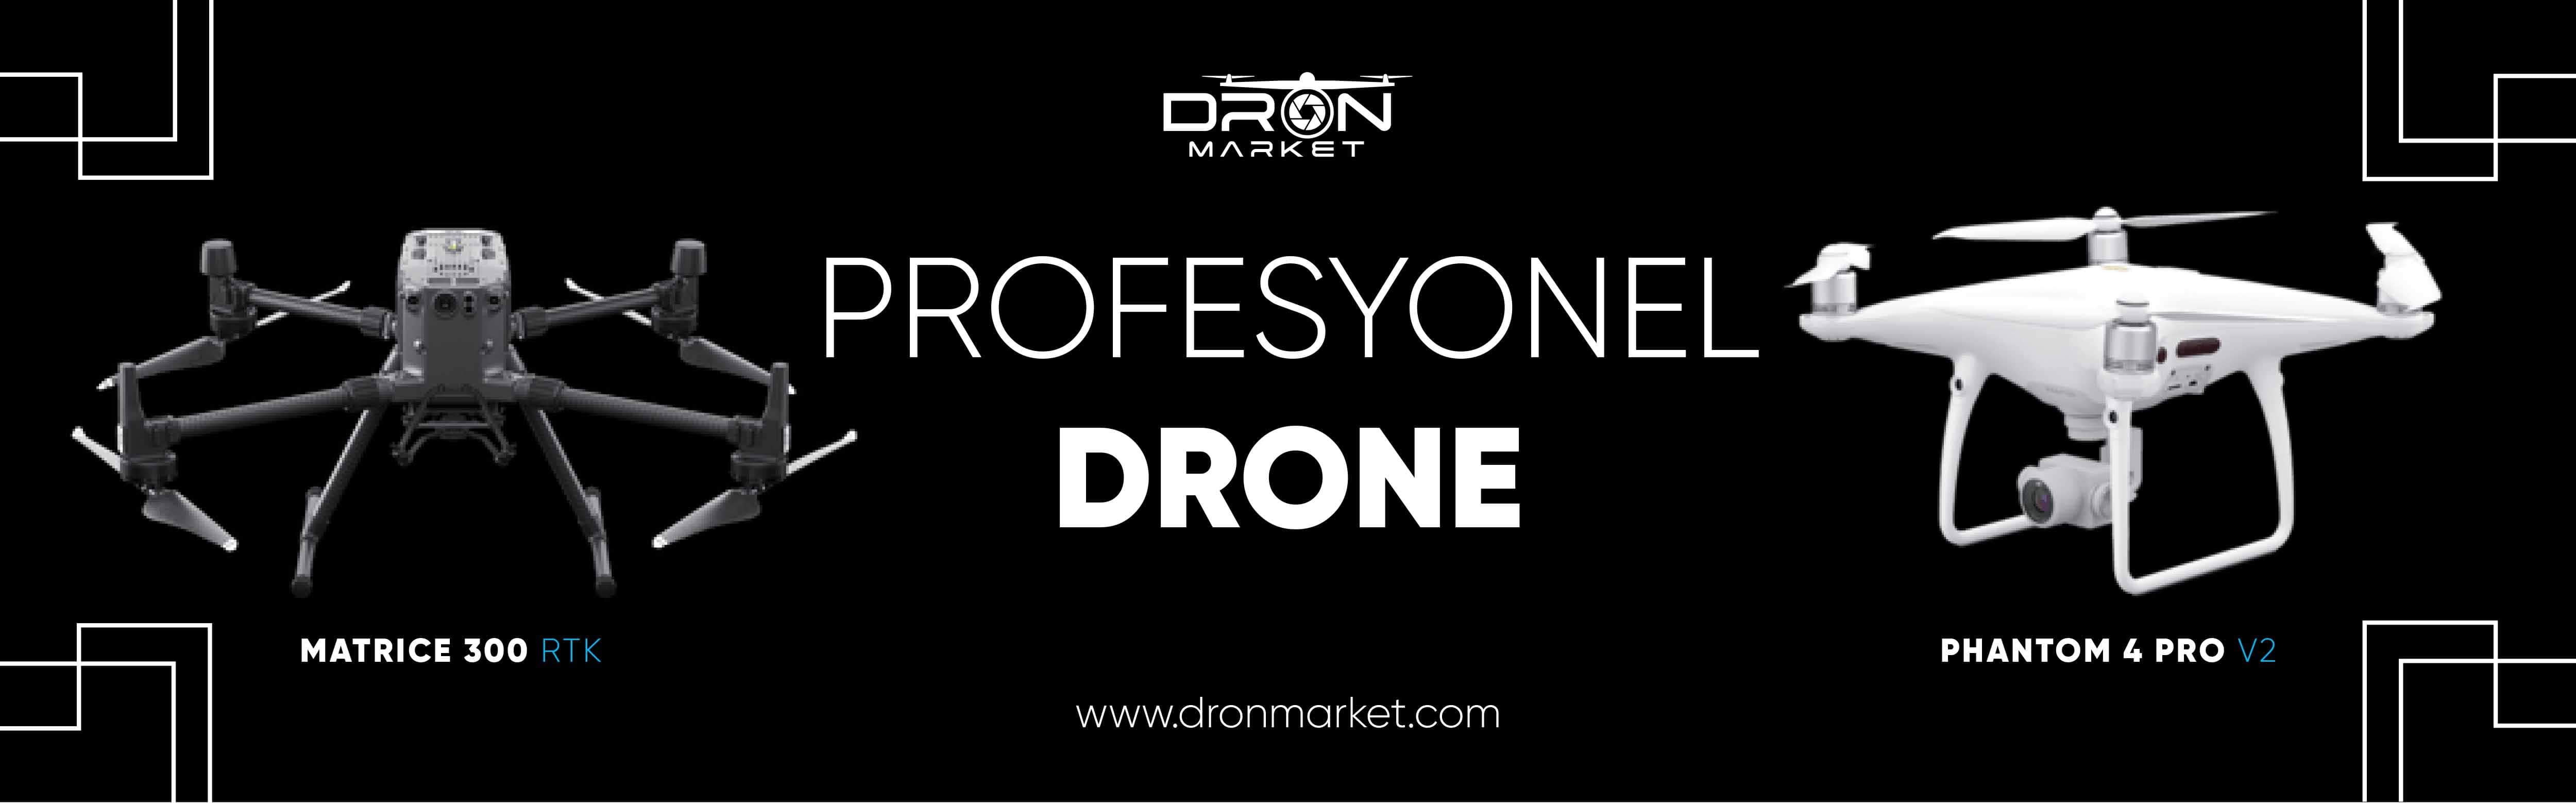 professional drones at the best prices at dronmarket.com